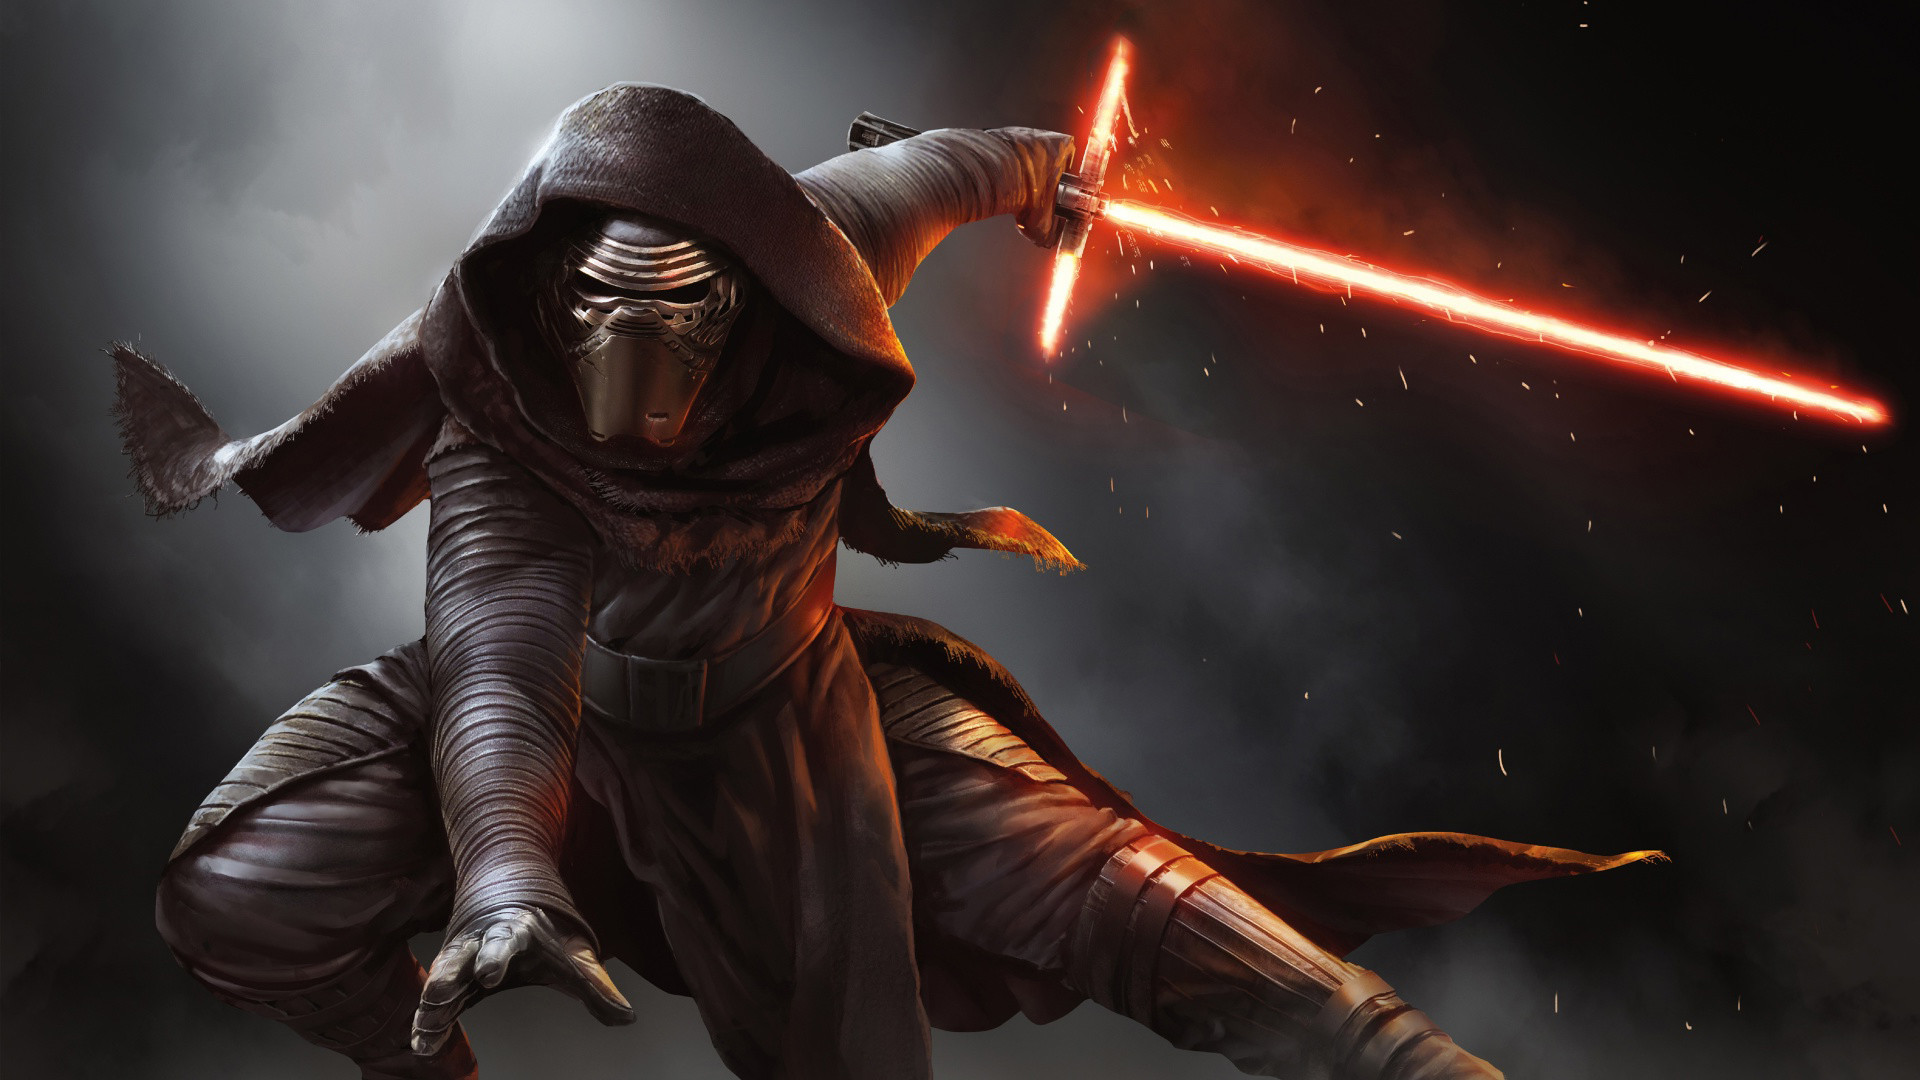 1920x1080 kylo-ren-lightsaber-We-finally-know-why-Kylo-Ren's-lightsaber-has-a-crossguard-in-Star- wallpaper-wpt7606359